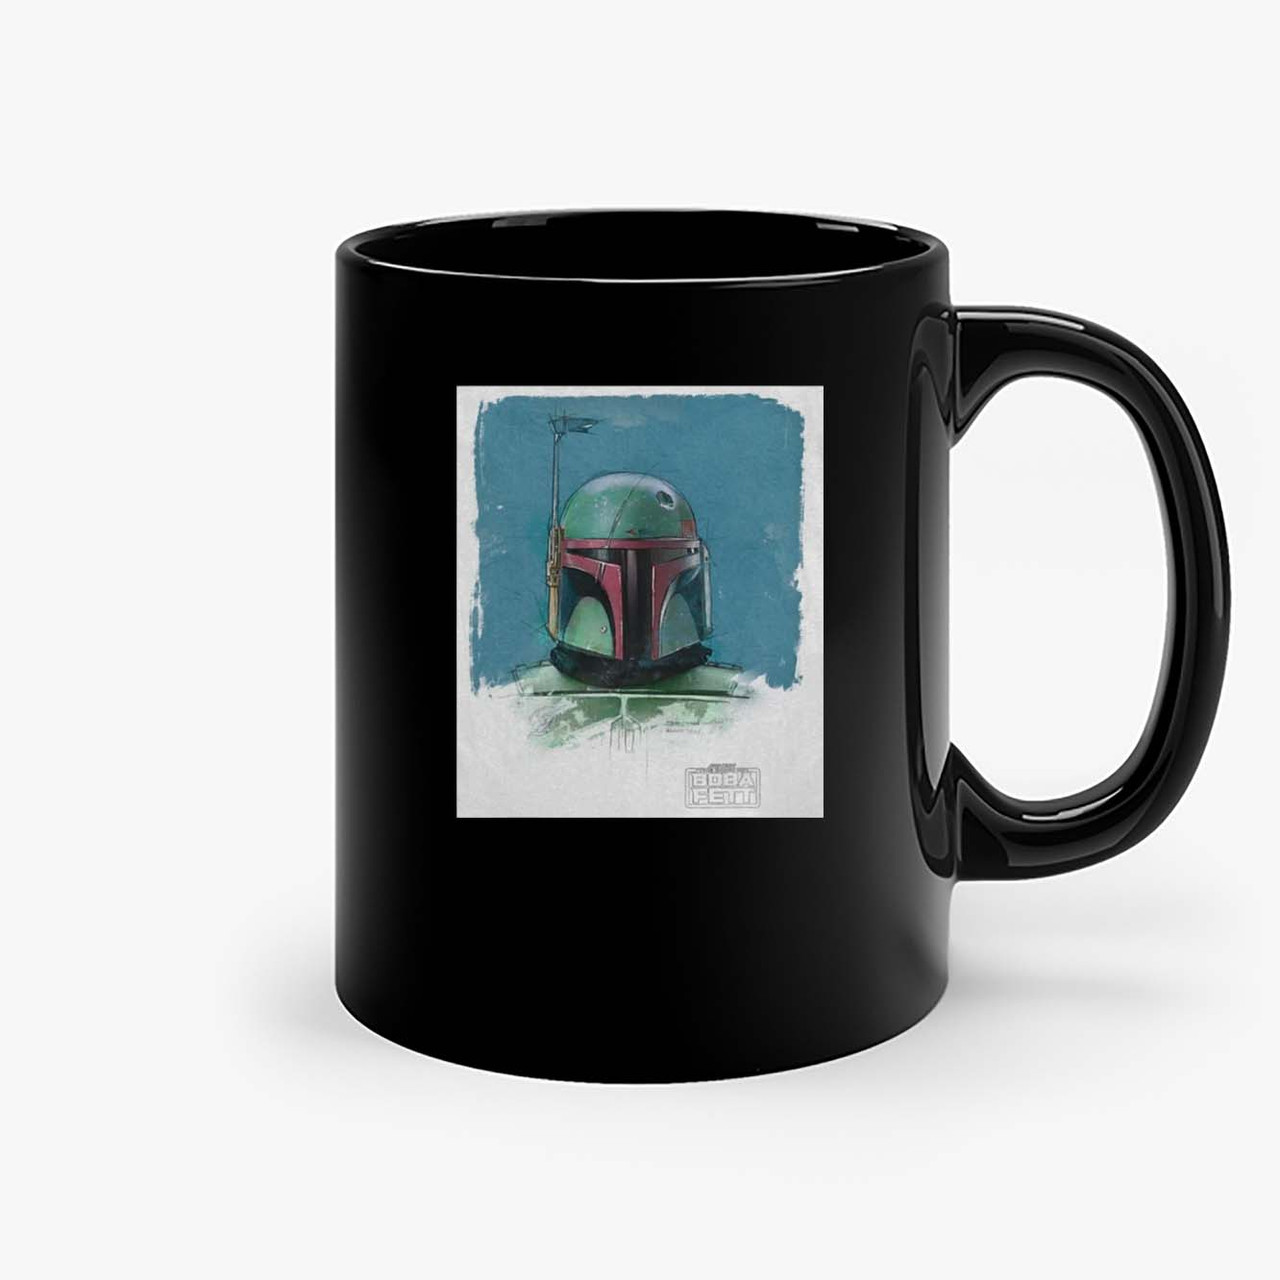 https://cdn11.bigcommerce.com/s-fbh9rcmv2i/images/stencil/1280x1280/products/748922/795542/star_wars_the_book_of_boba_fett_armor__88303.1697604482.jpg?c=1